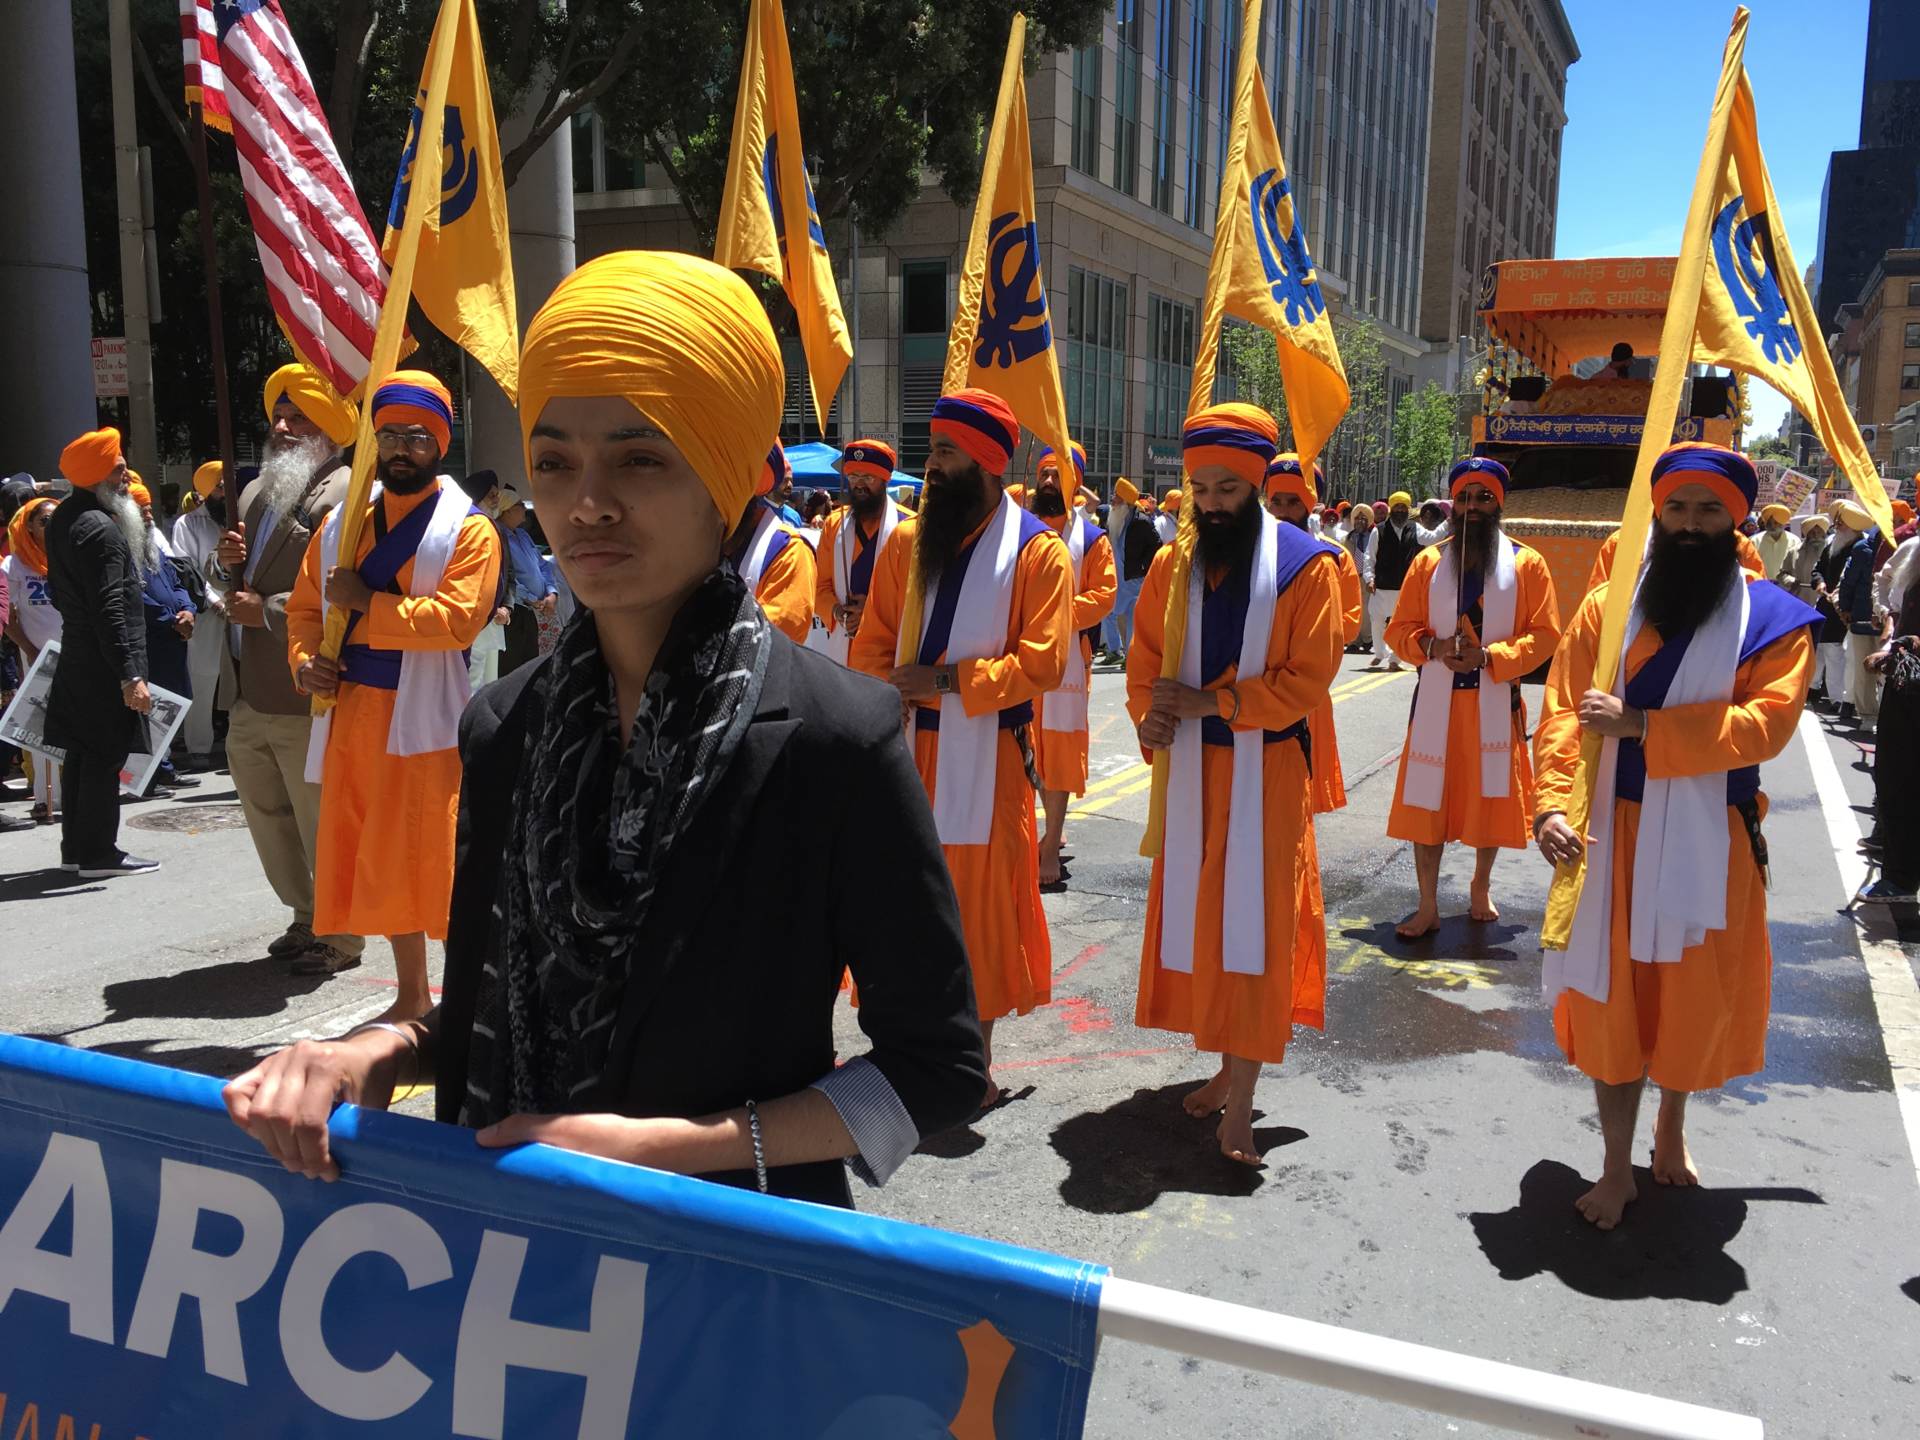 Thousands of Sikhs and their supporters paraded through San Francisco's streets on June 10, 2018, for the 5th Annual Remembrance March and Freedom Rally. Shia Levitt/KQED